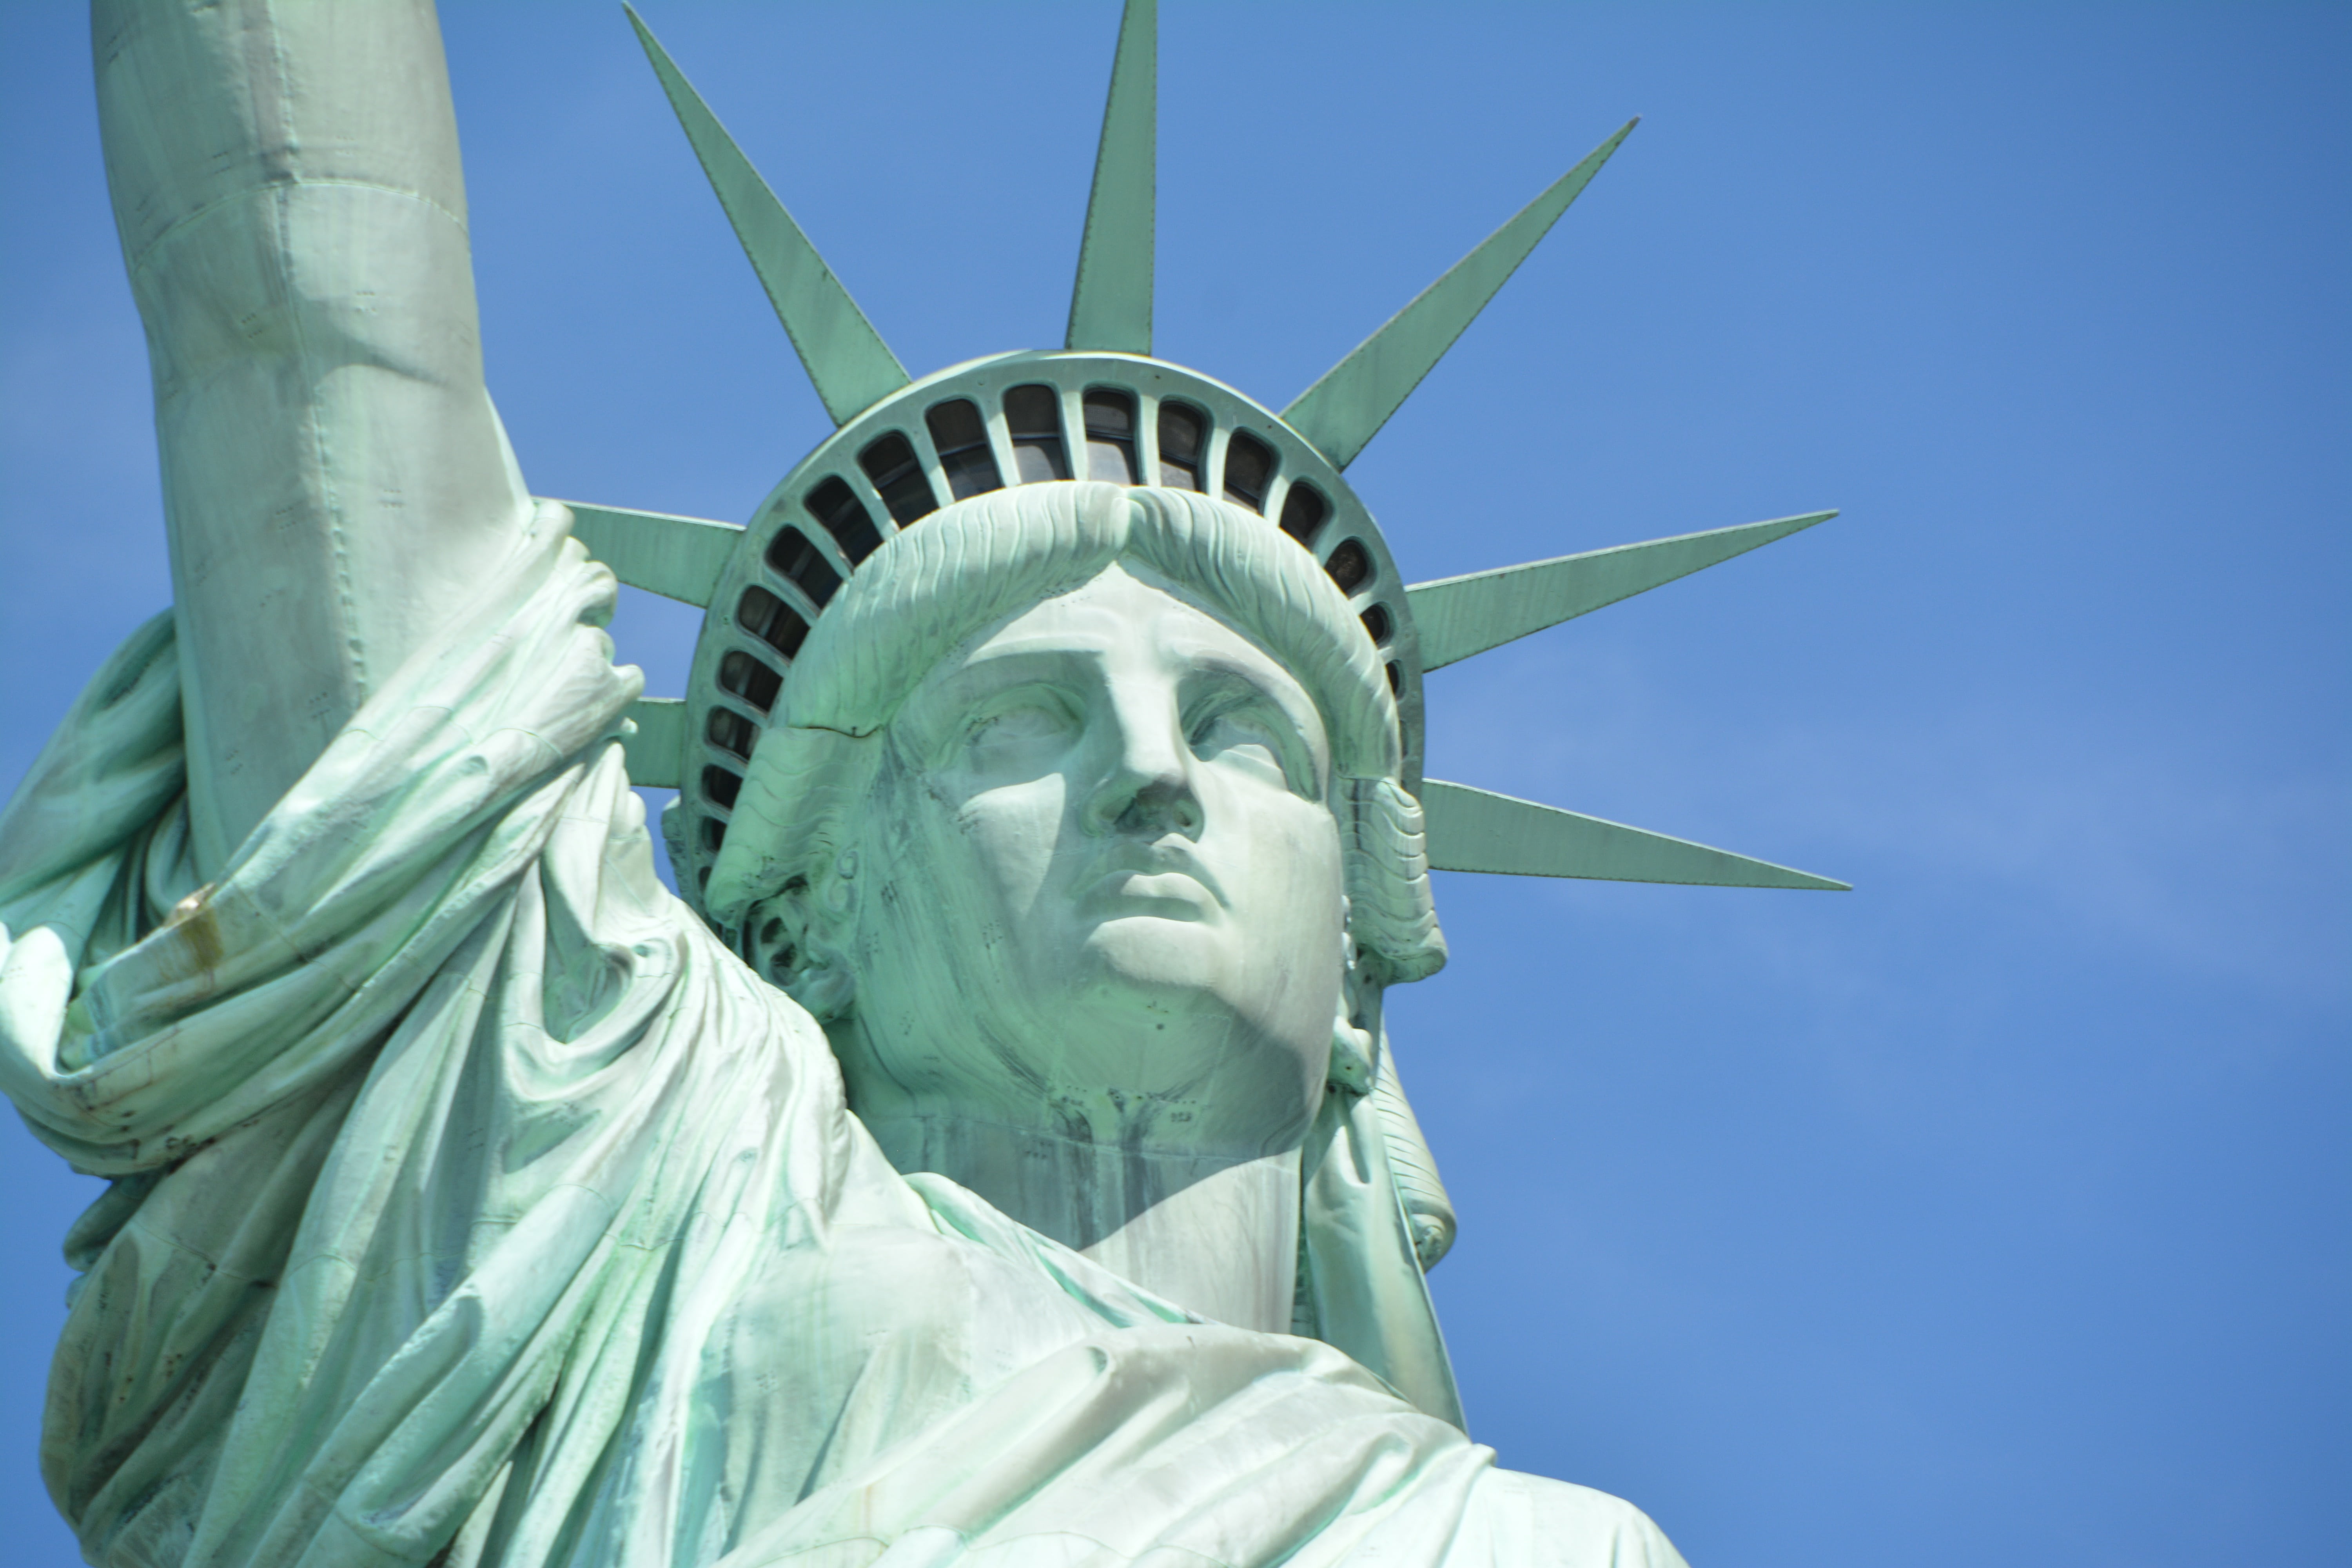 close-up photo of Statue of Liberty, new york, dom, liberty Island